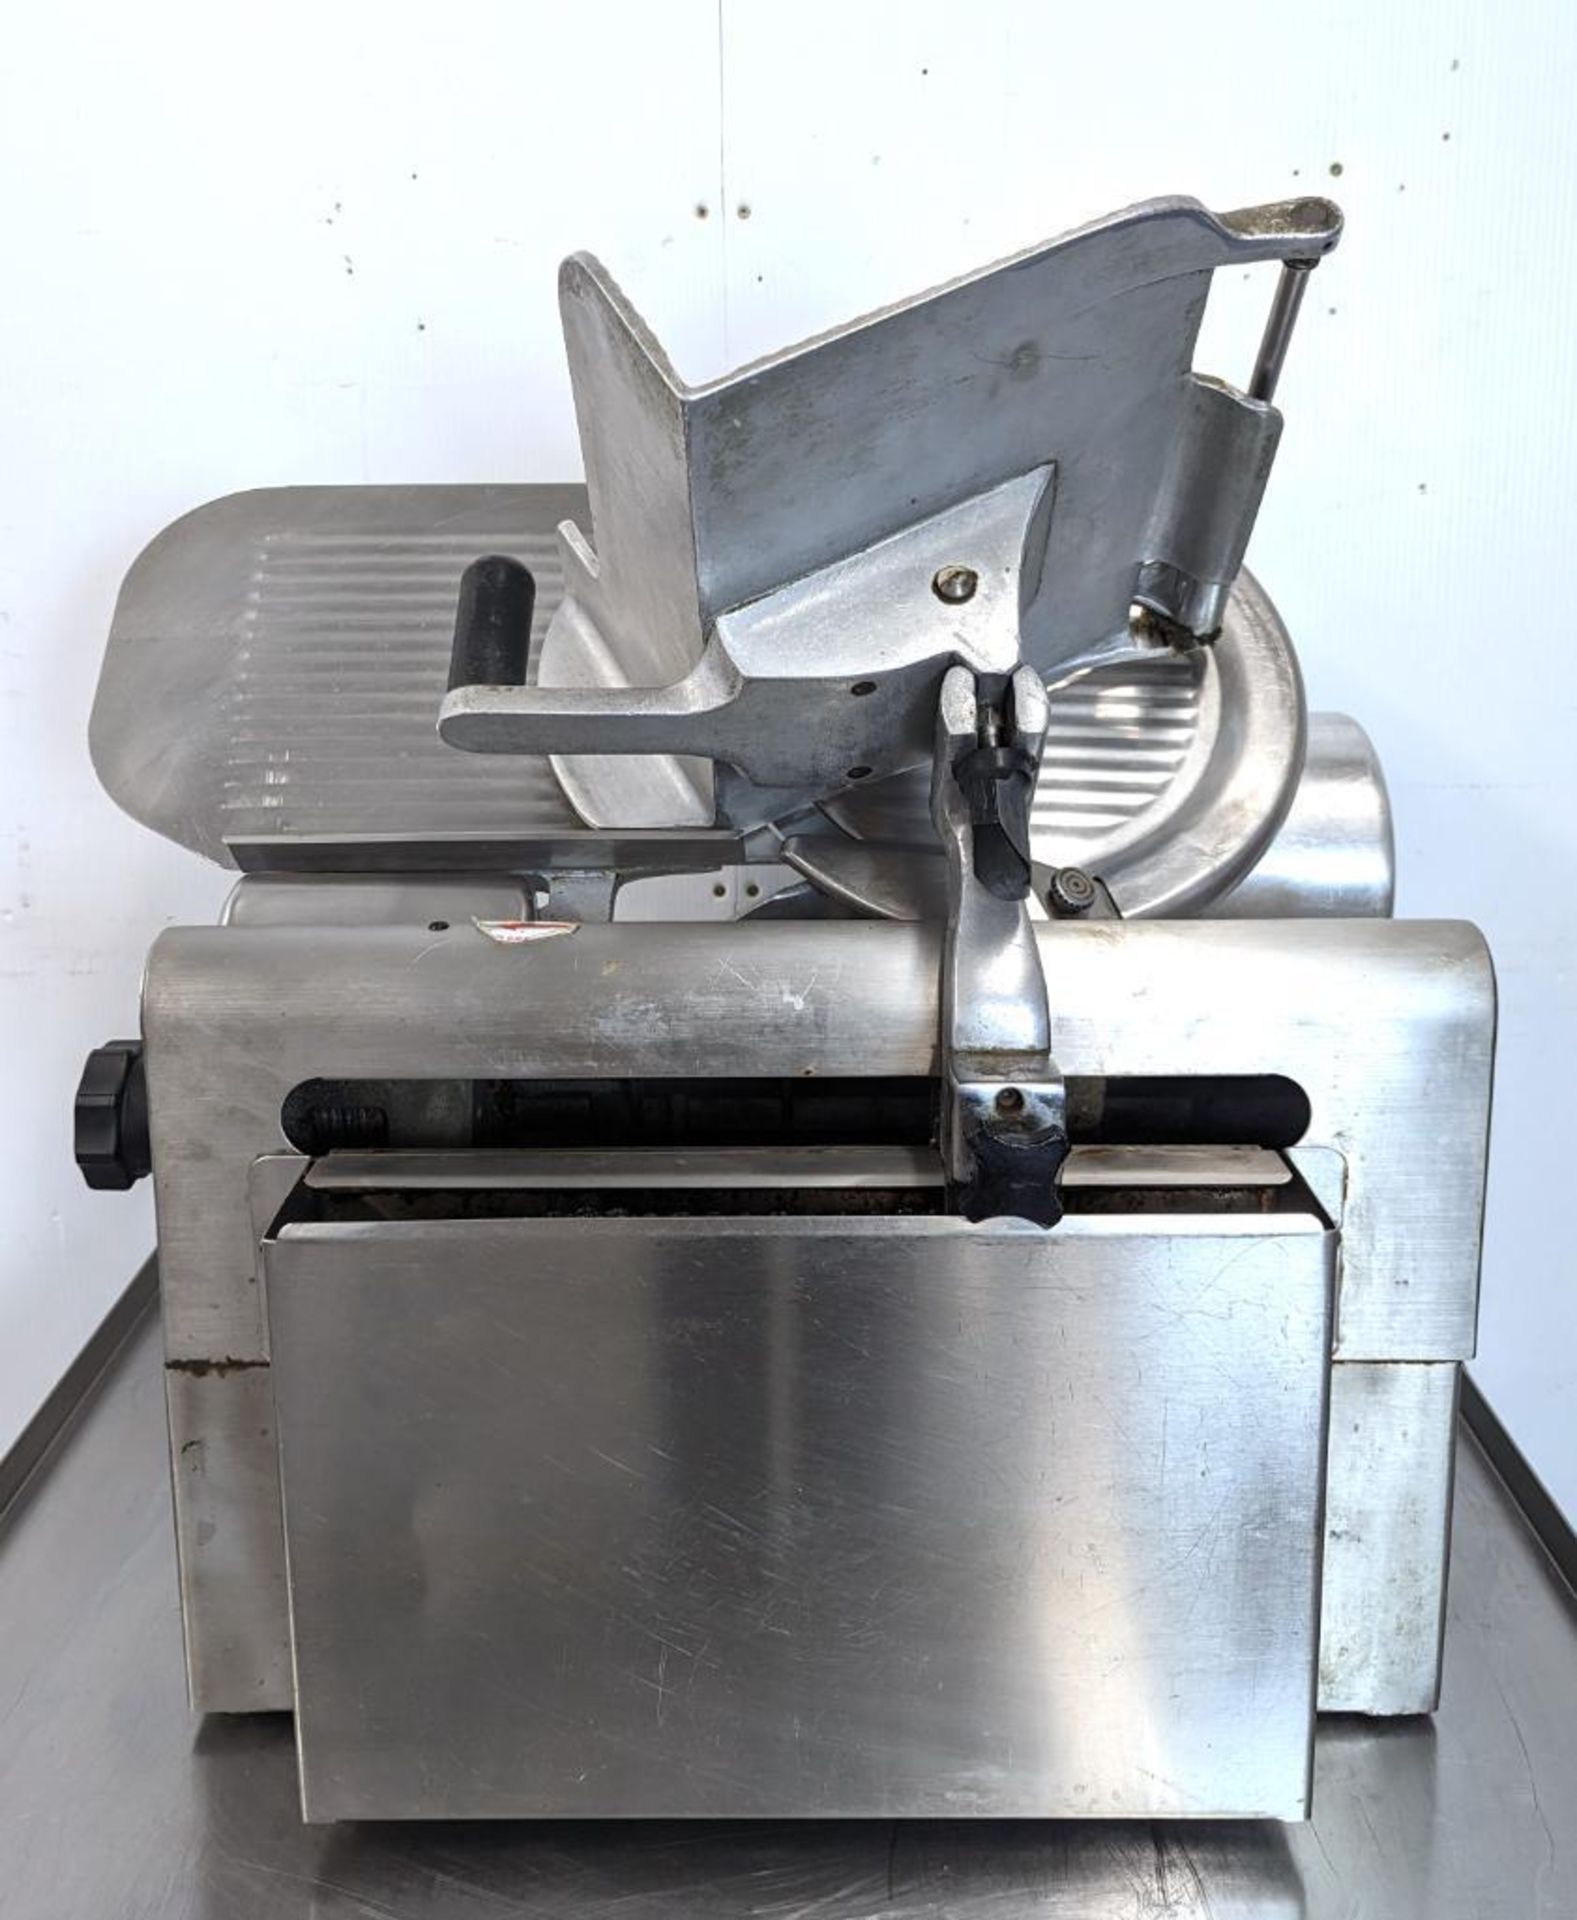 GLOBE 775 12" AUTOMATIC MEAT SLICER WITH BLADE SHARPENER - Image 5 of 14